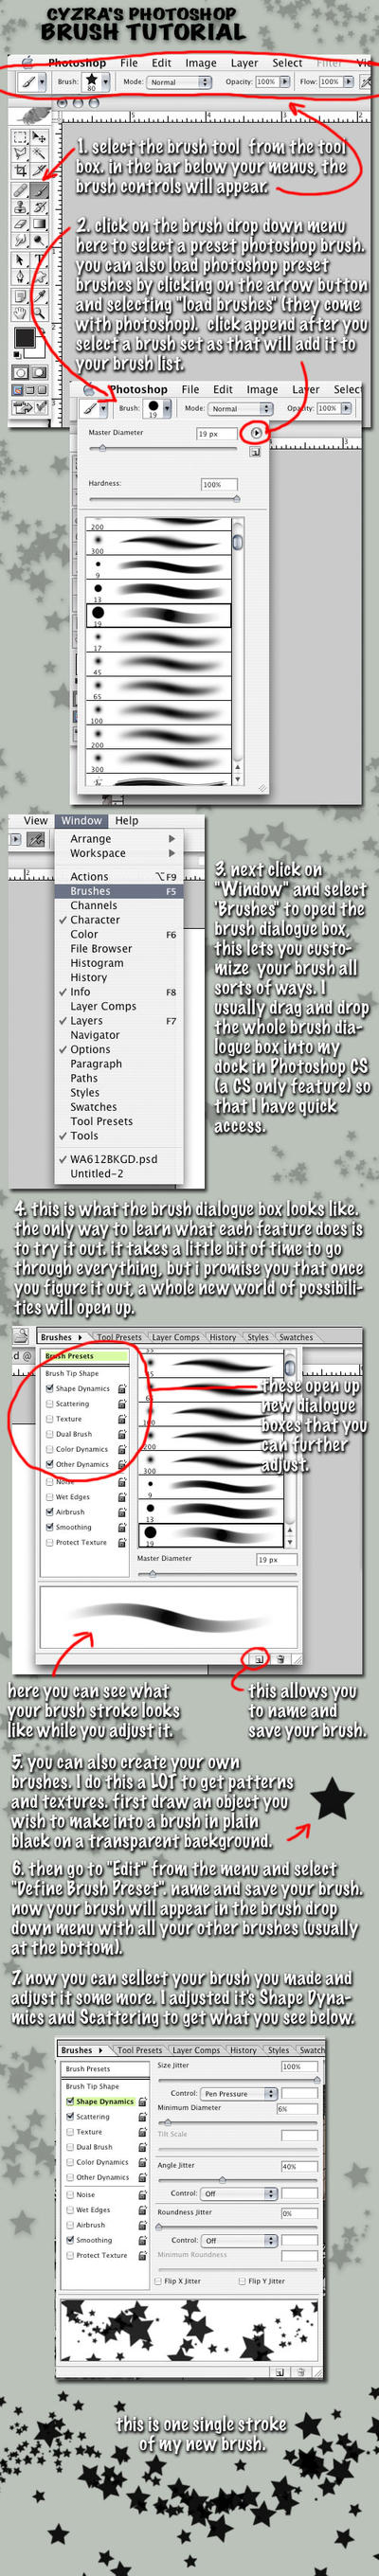 Creating Brushes in Photoshop